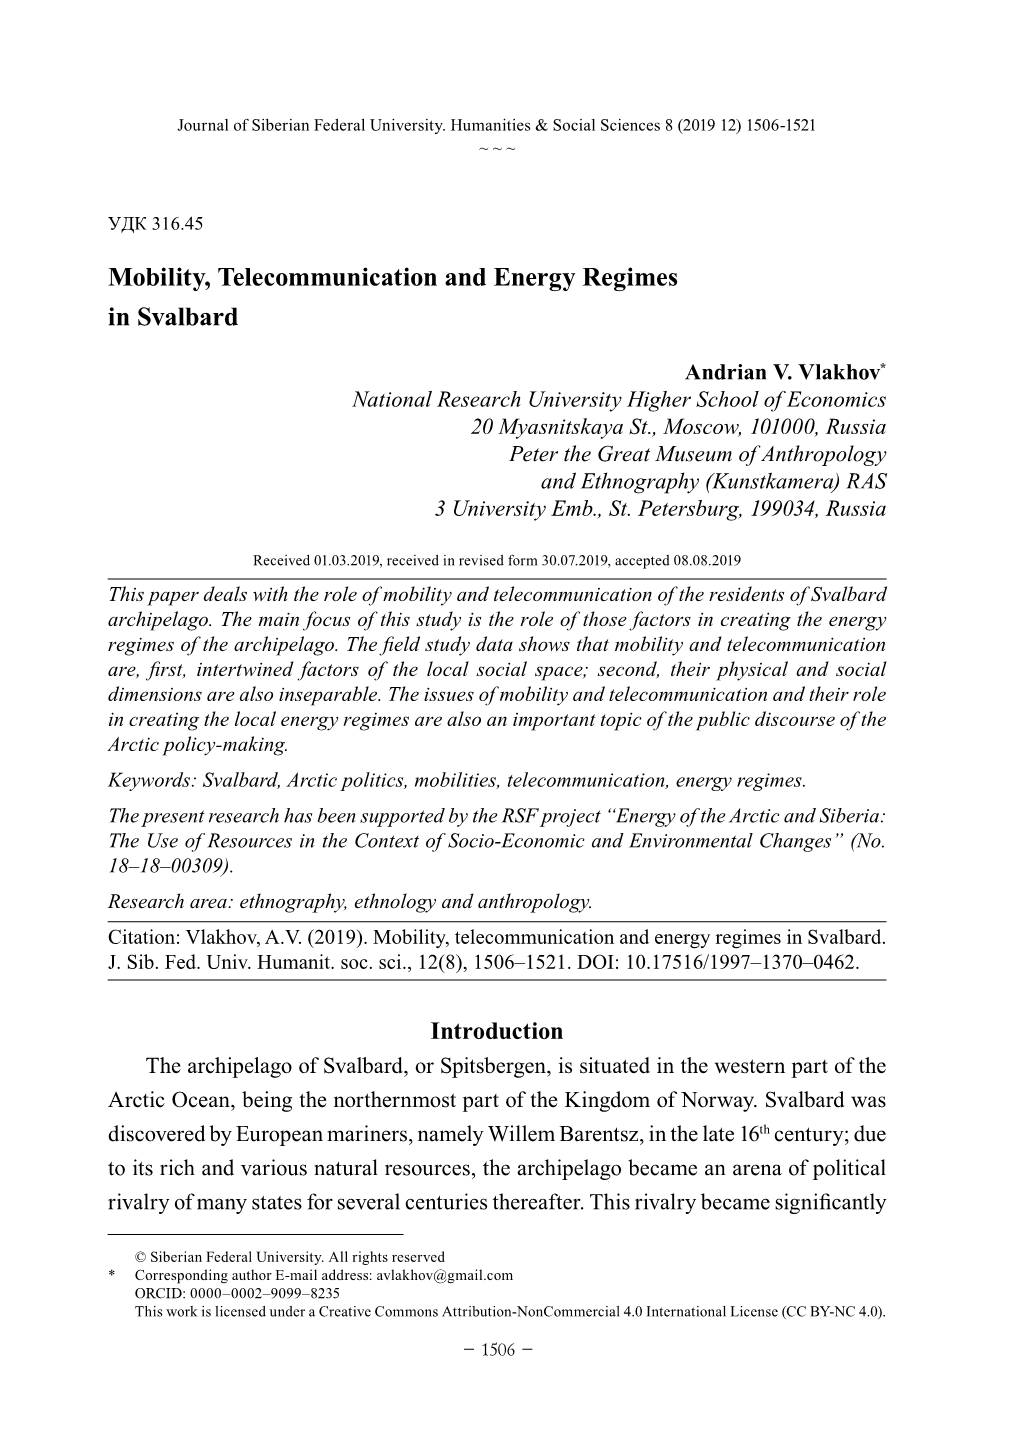 Mobility, Telecommunication and Energy Regimes in Svalbard